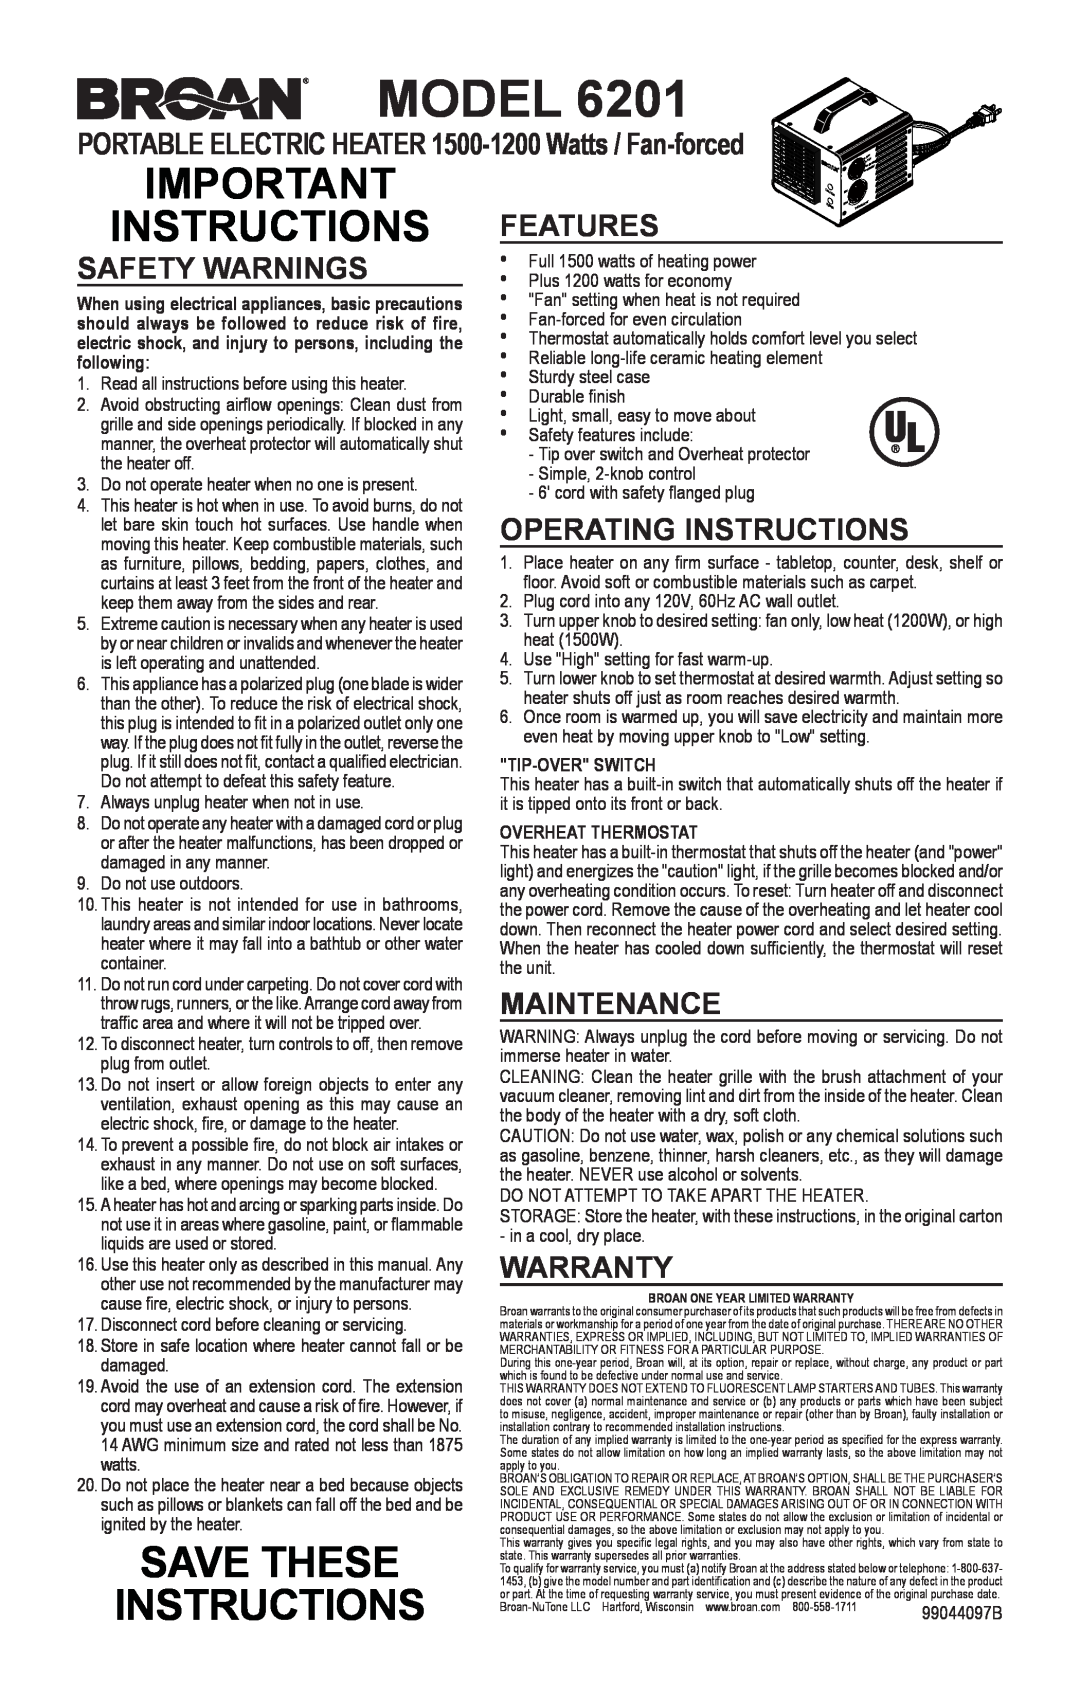 Broan 6201 warranty Model, Important Instructions Features, Save These Instructions, Safety Warnings, Maintenance 